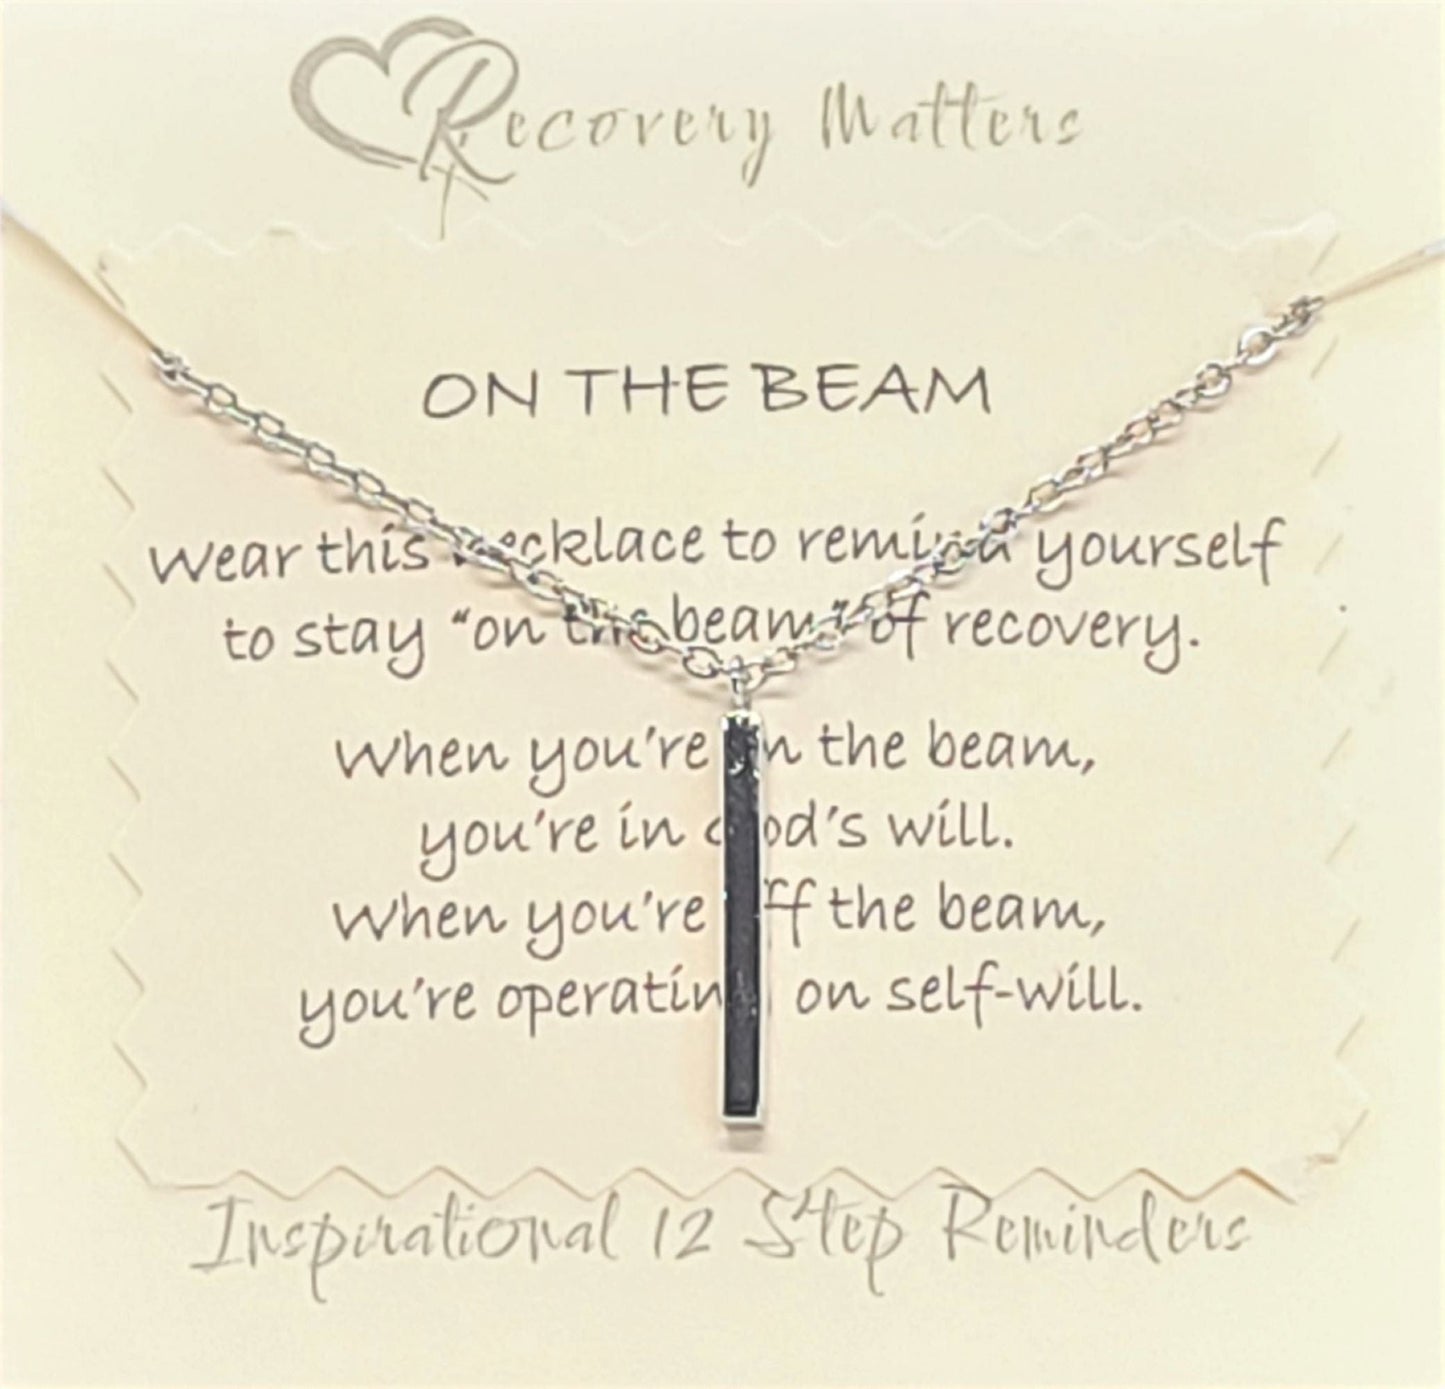 On the Beam Necklace by Recovery Matters